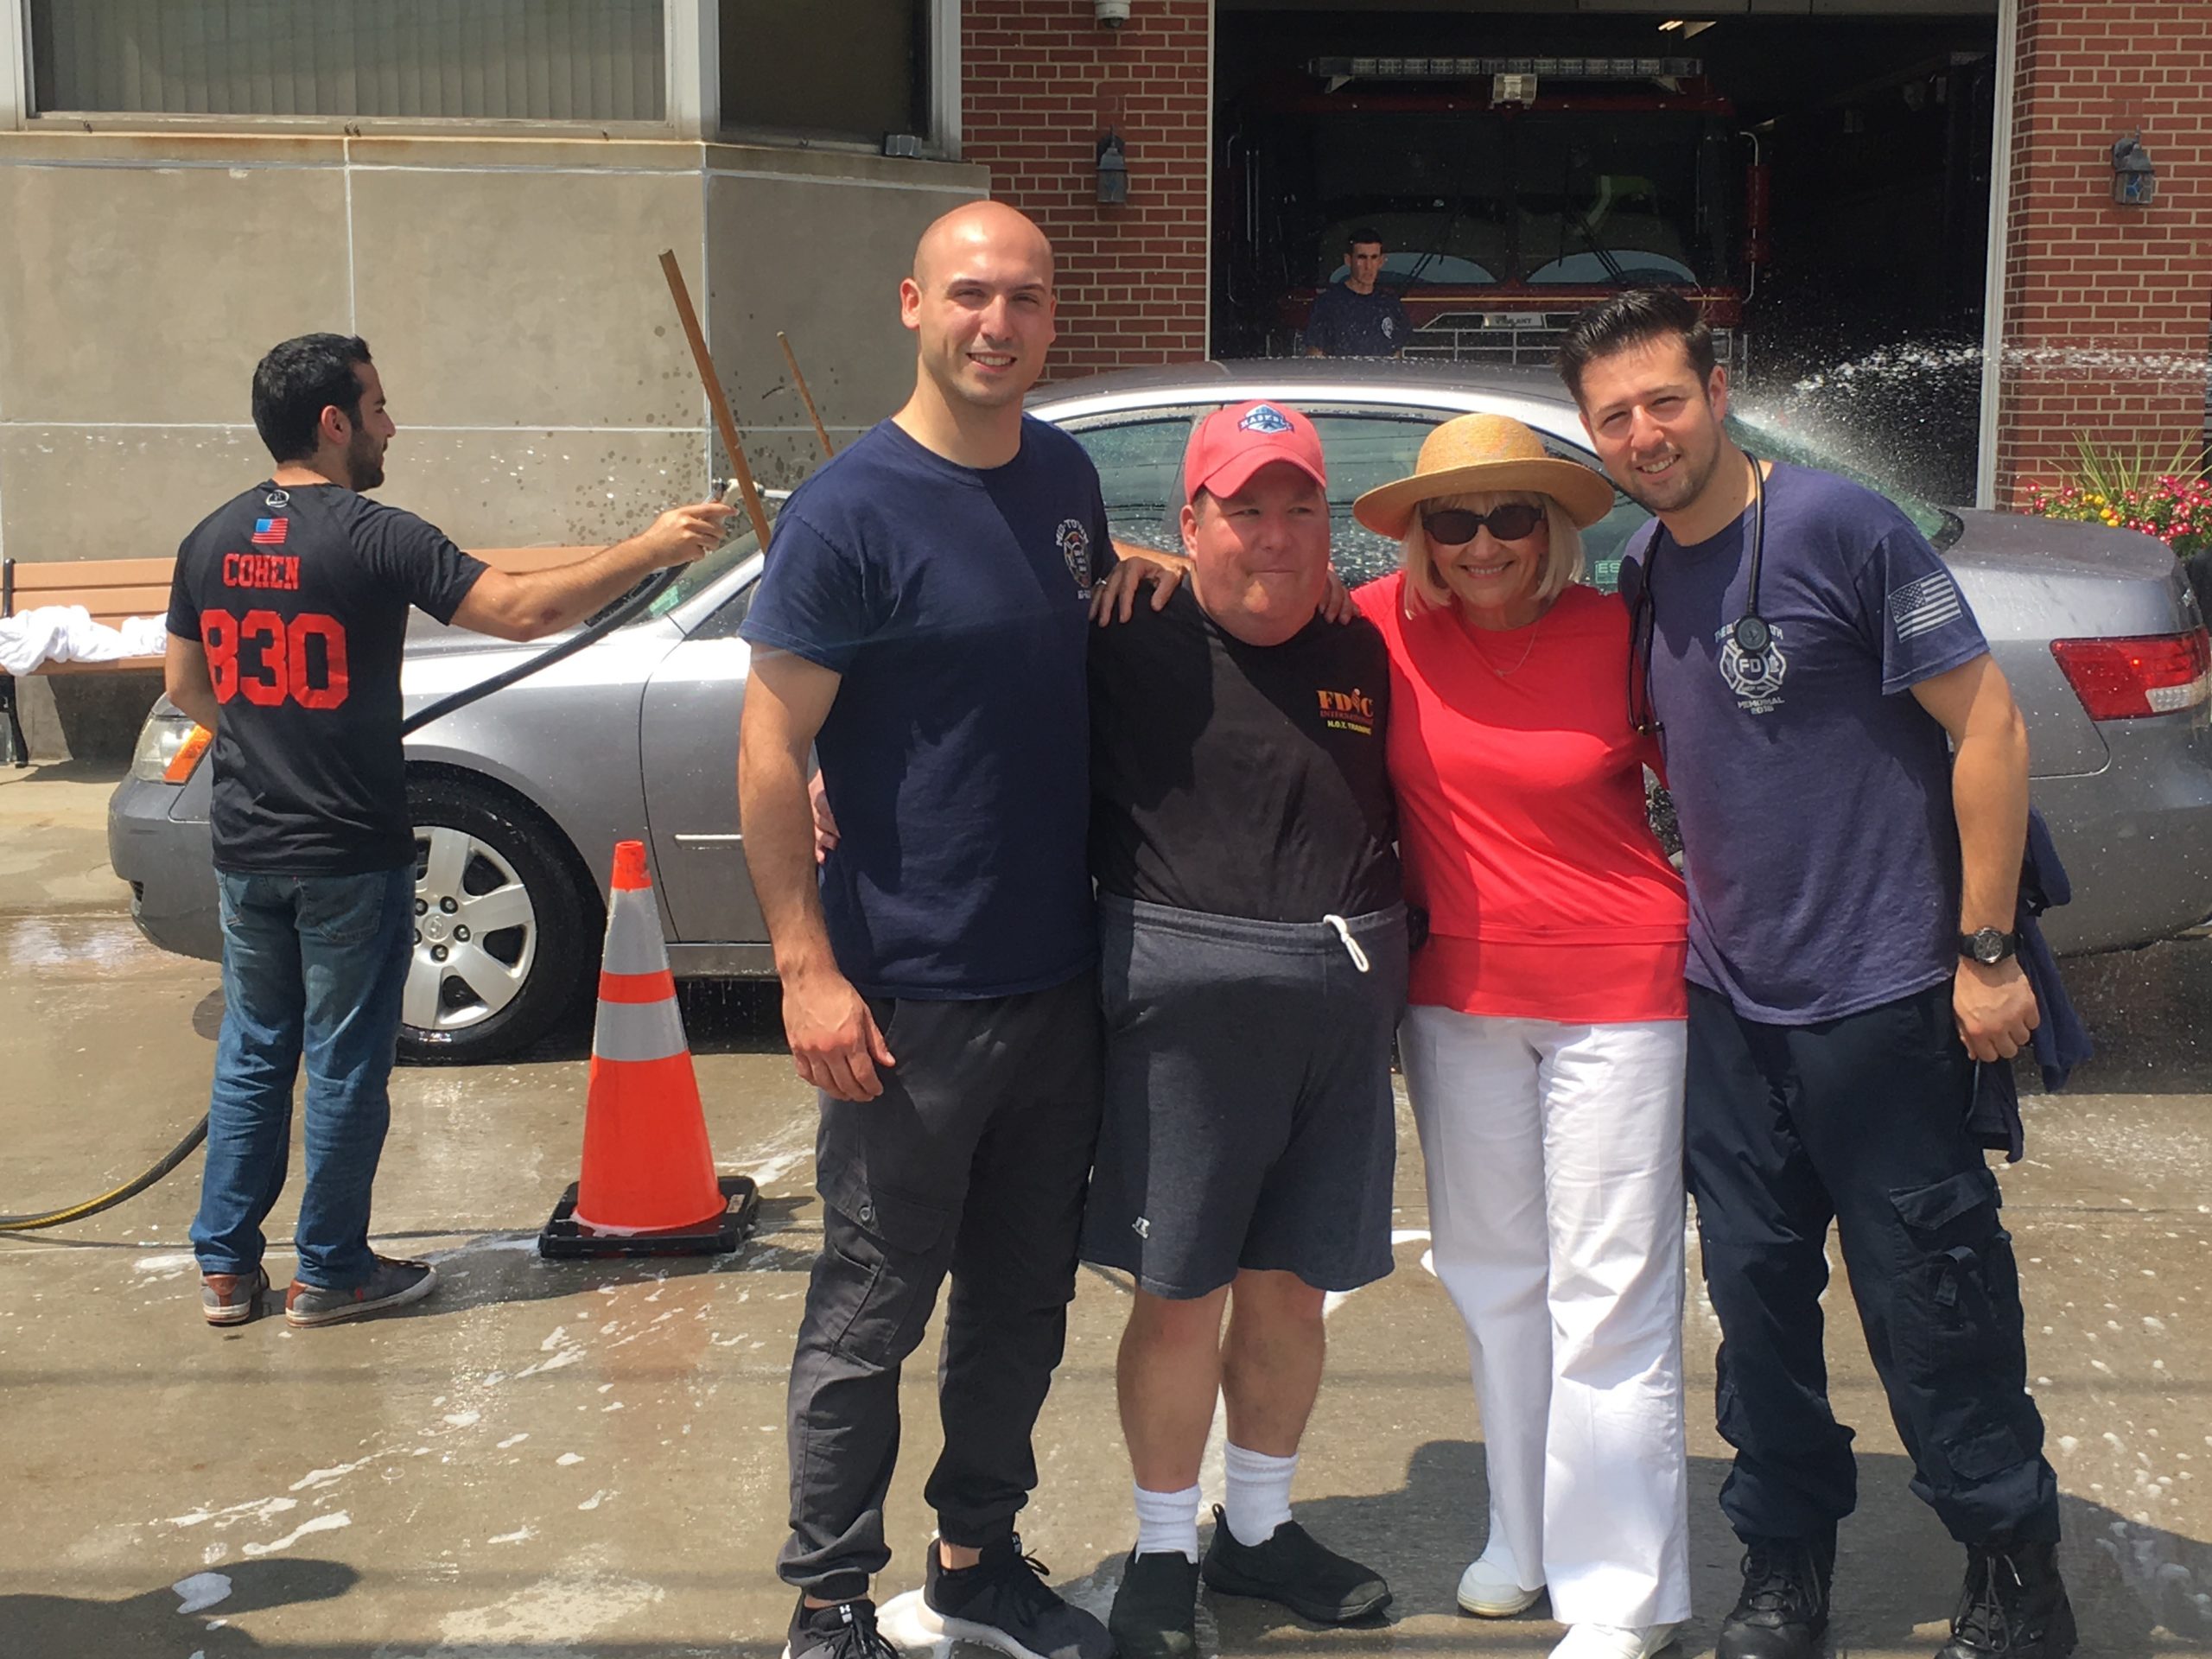 First Assistant EMS Chief Joseph Oginsky, Erin Lipinsky, Supervisor Judi Bosworth and Steve Shapiro at a car wash benefiting Special Olympics New York. (Photo courtesy of the Town of North Hempstead)